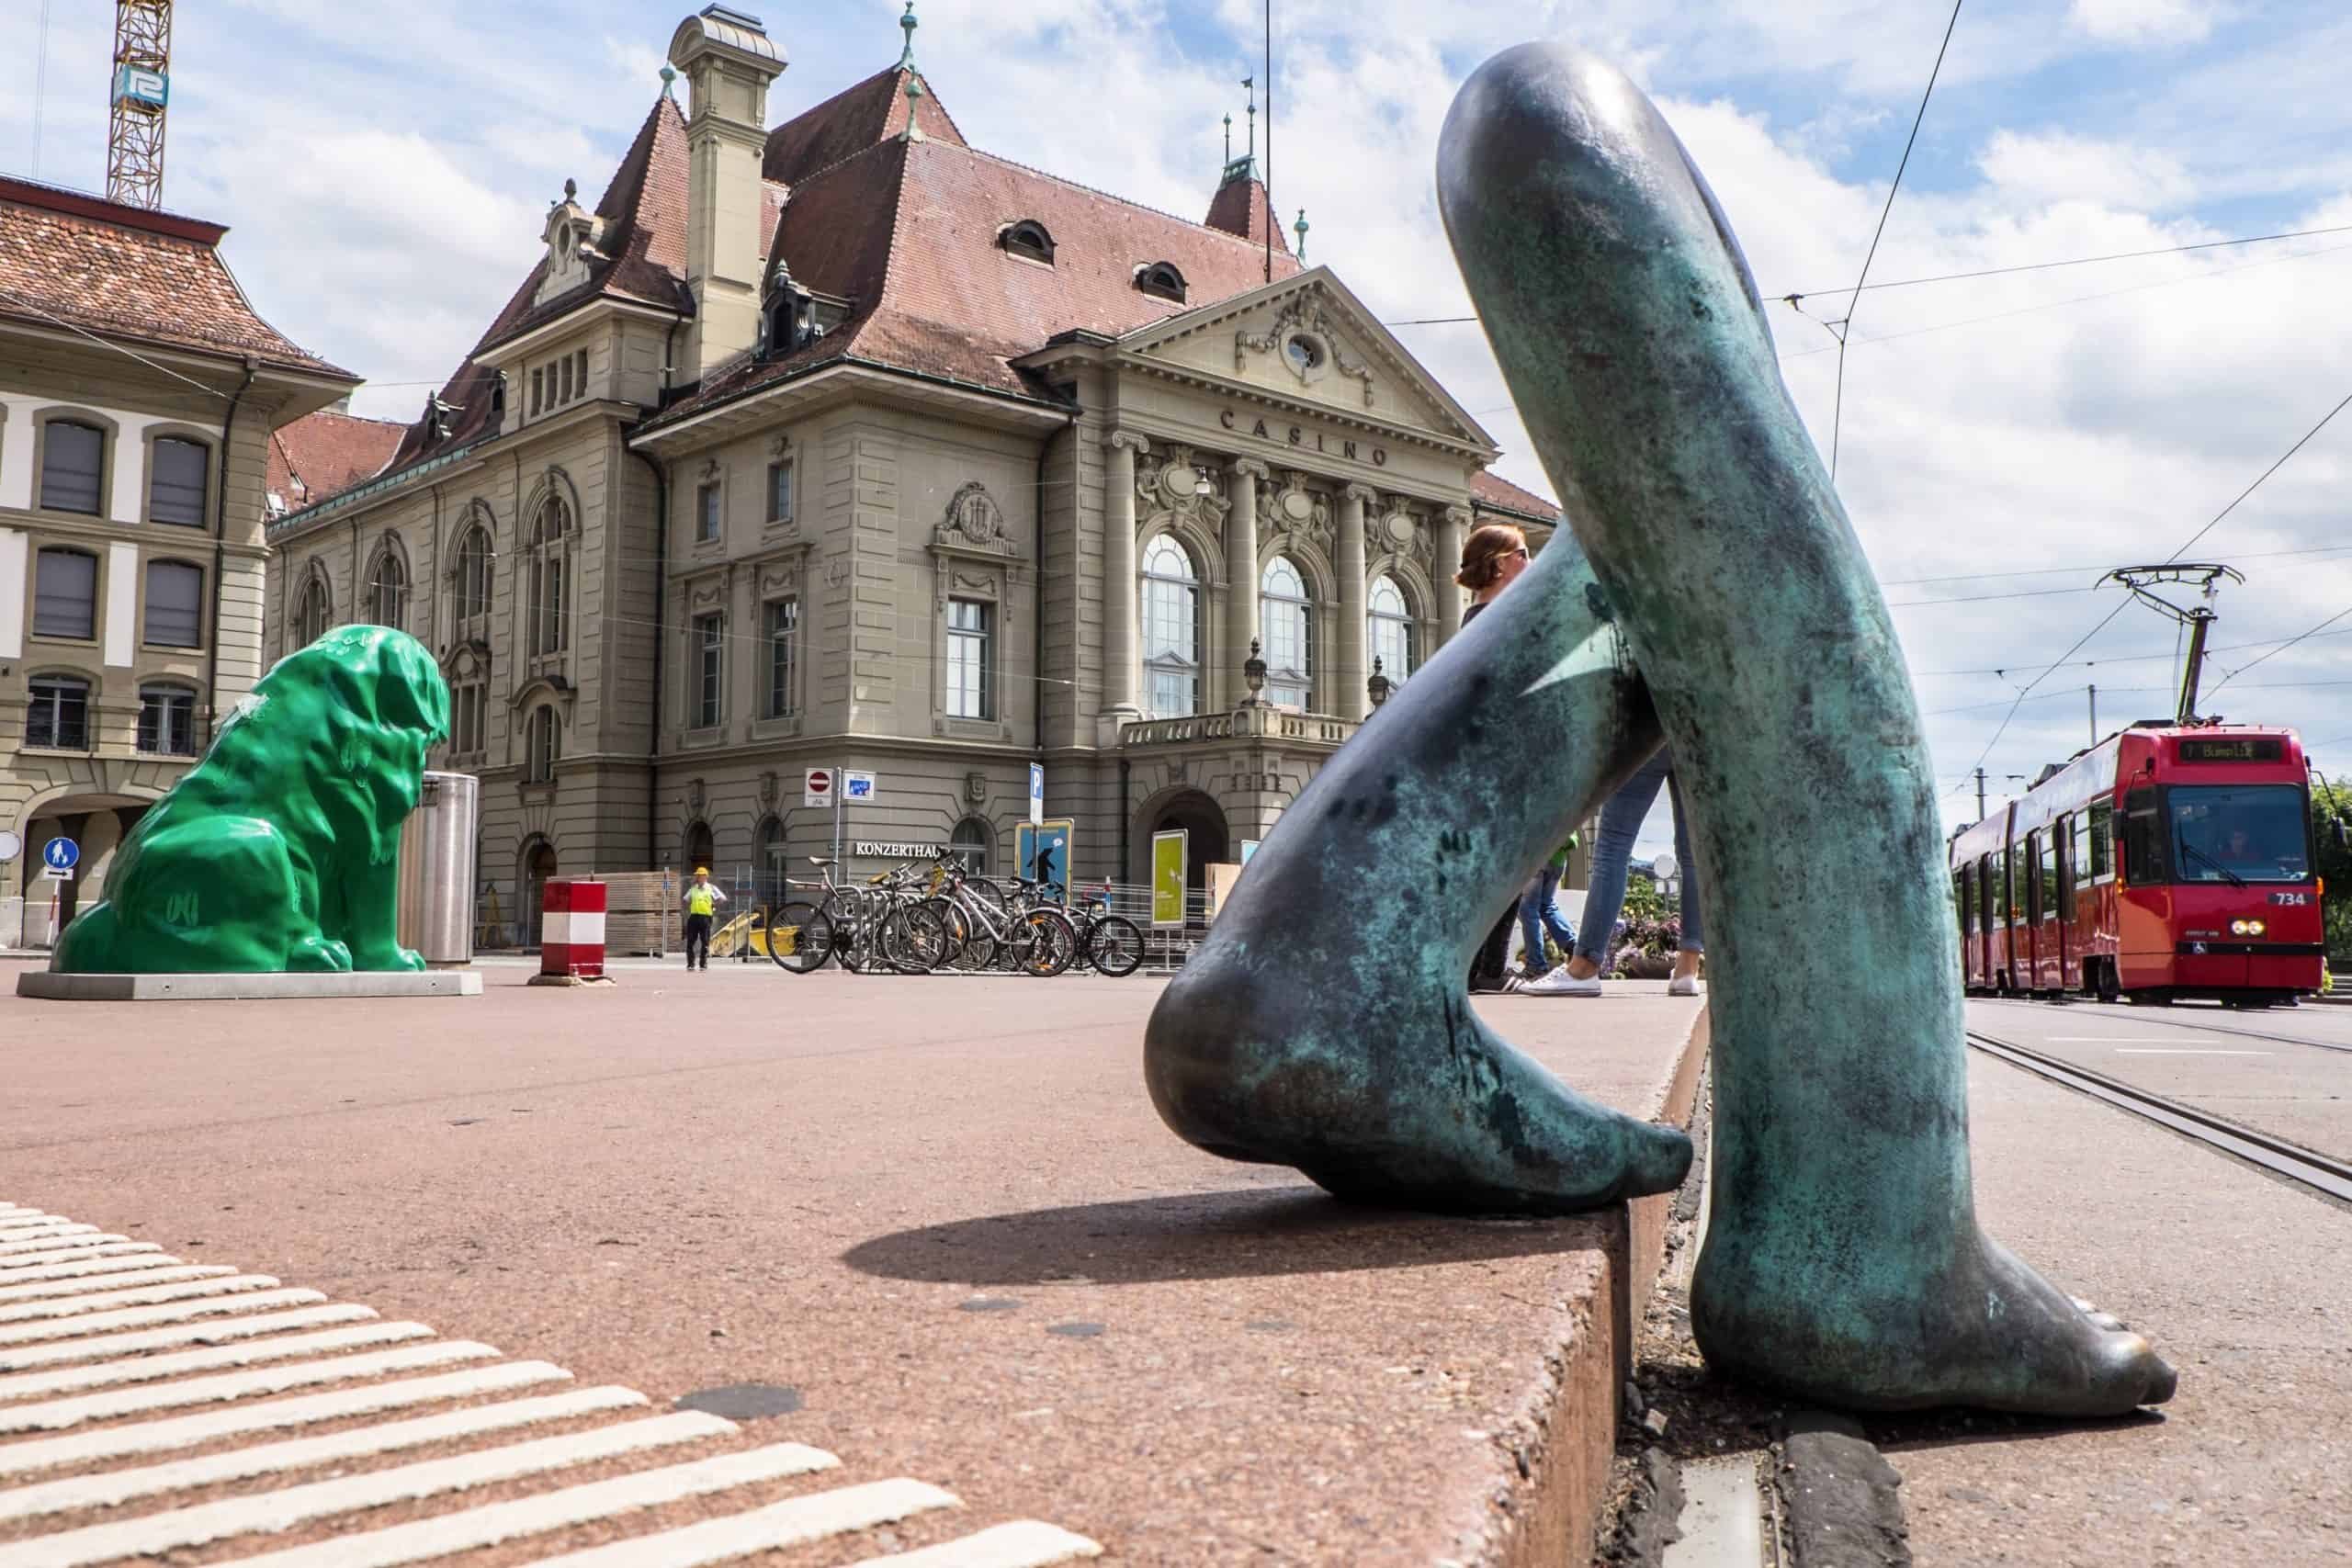 A giant green dog and giant walking legs - artistic street sculptures in Bern, Switzerland